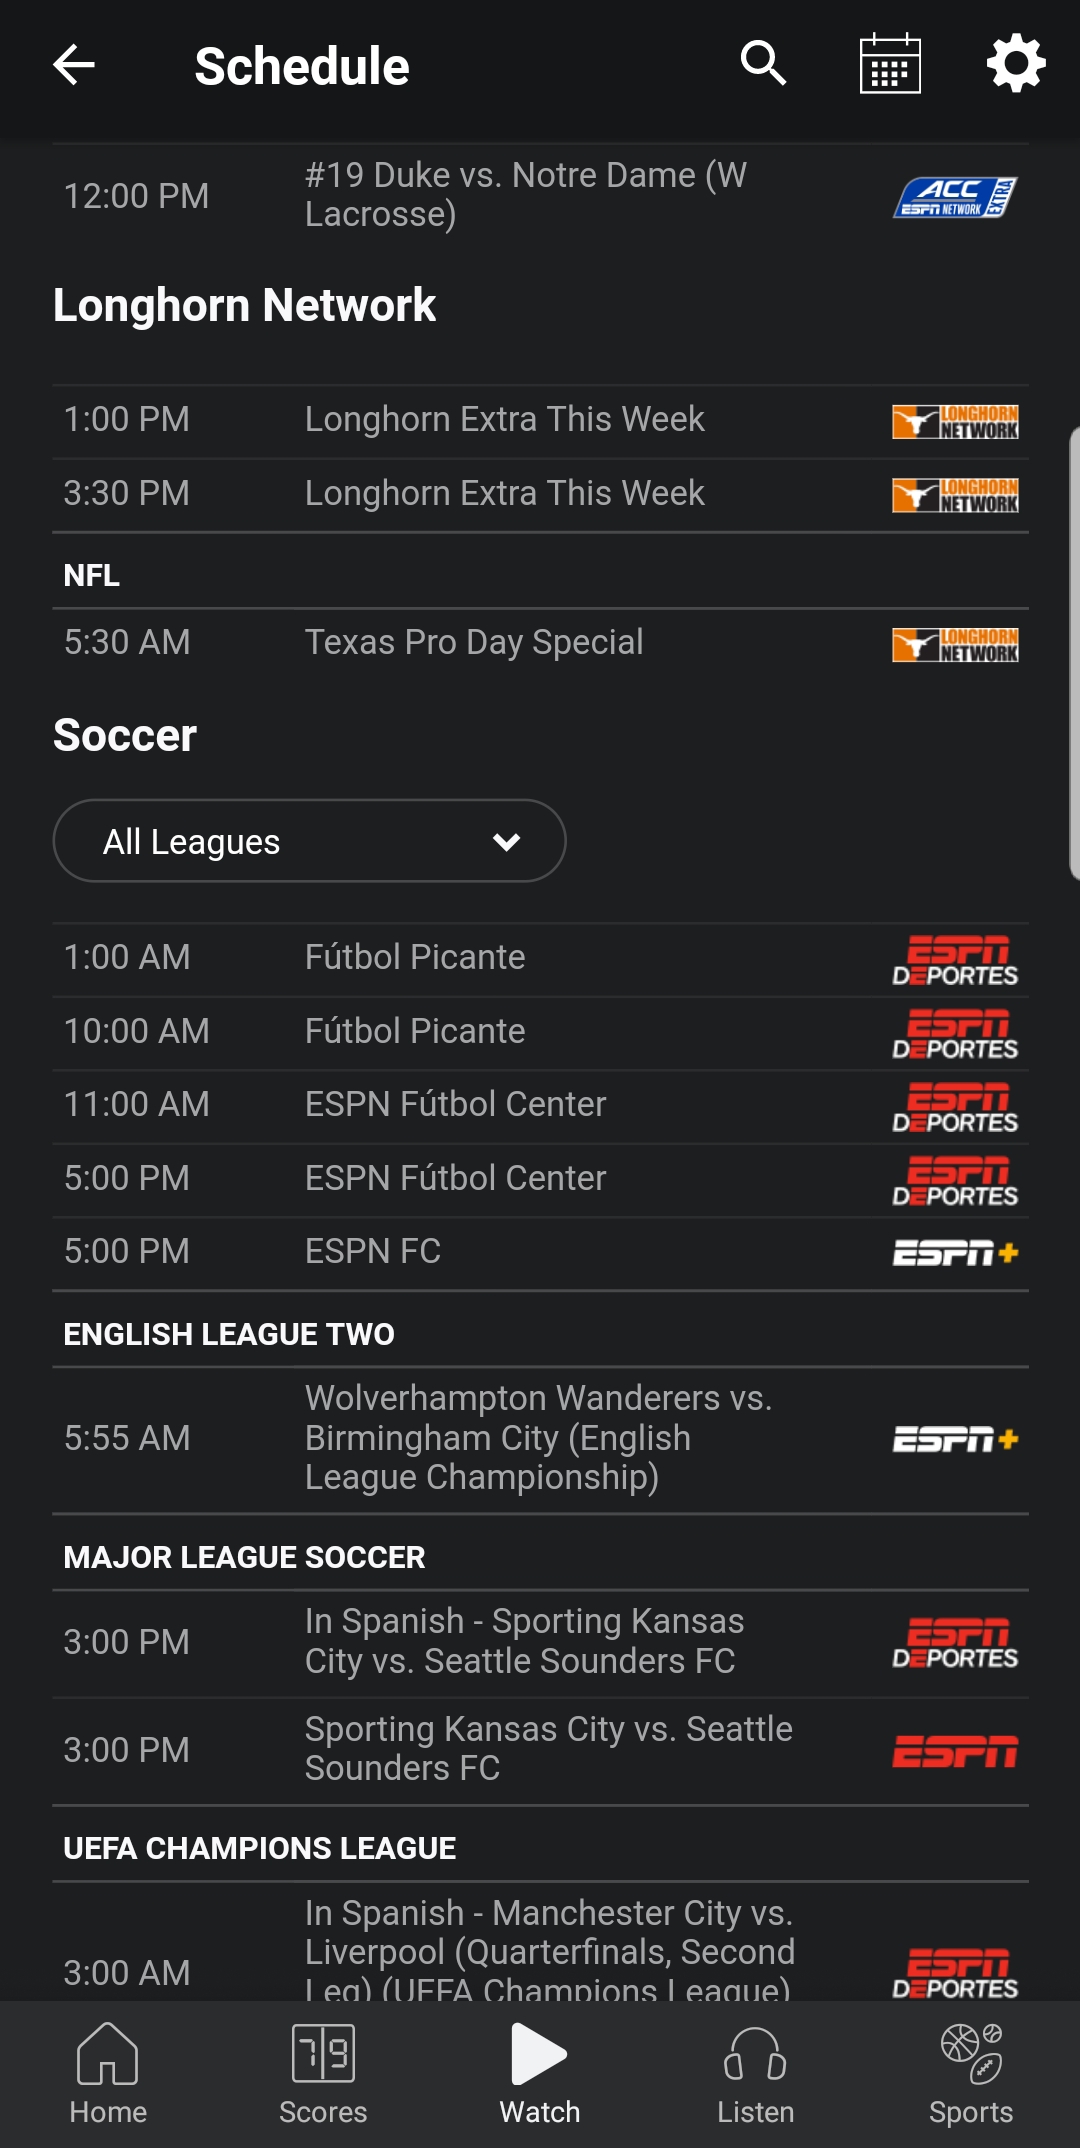 TV listing for watching Wolves v. Blues this Sunday